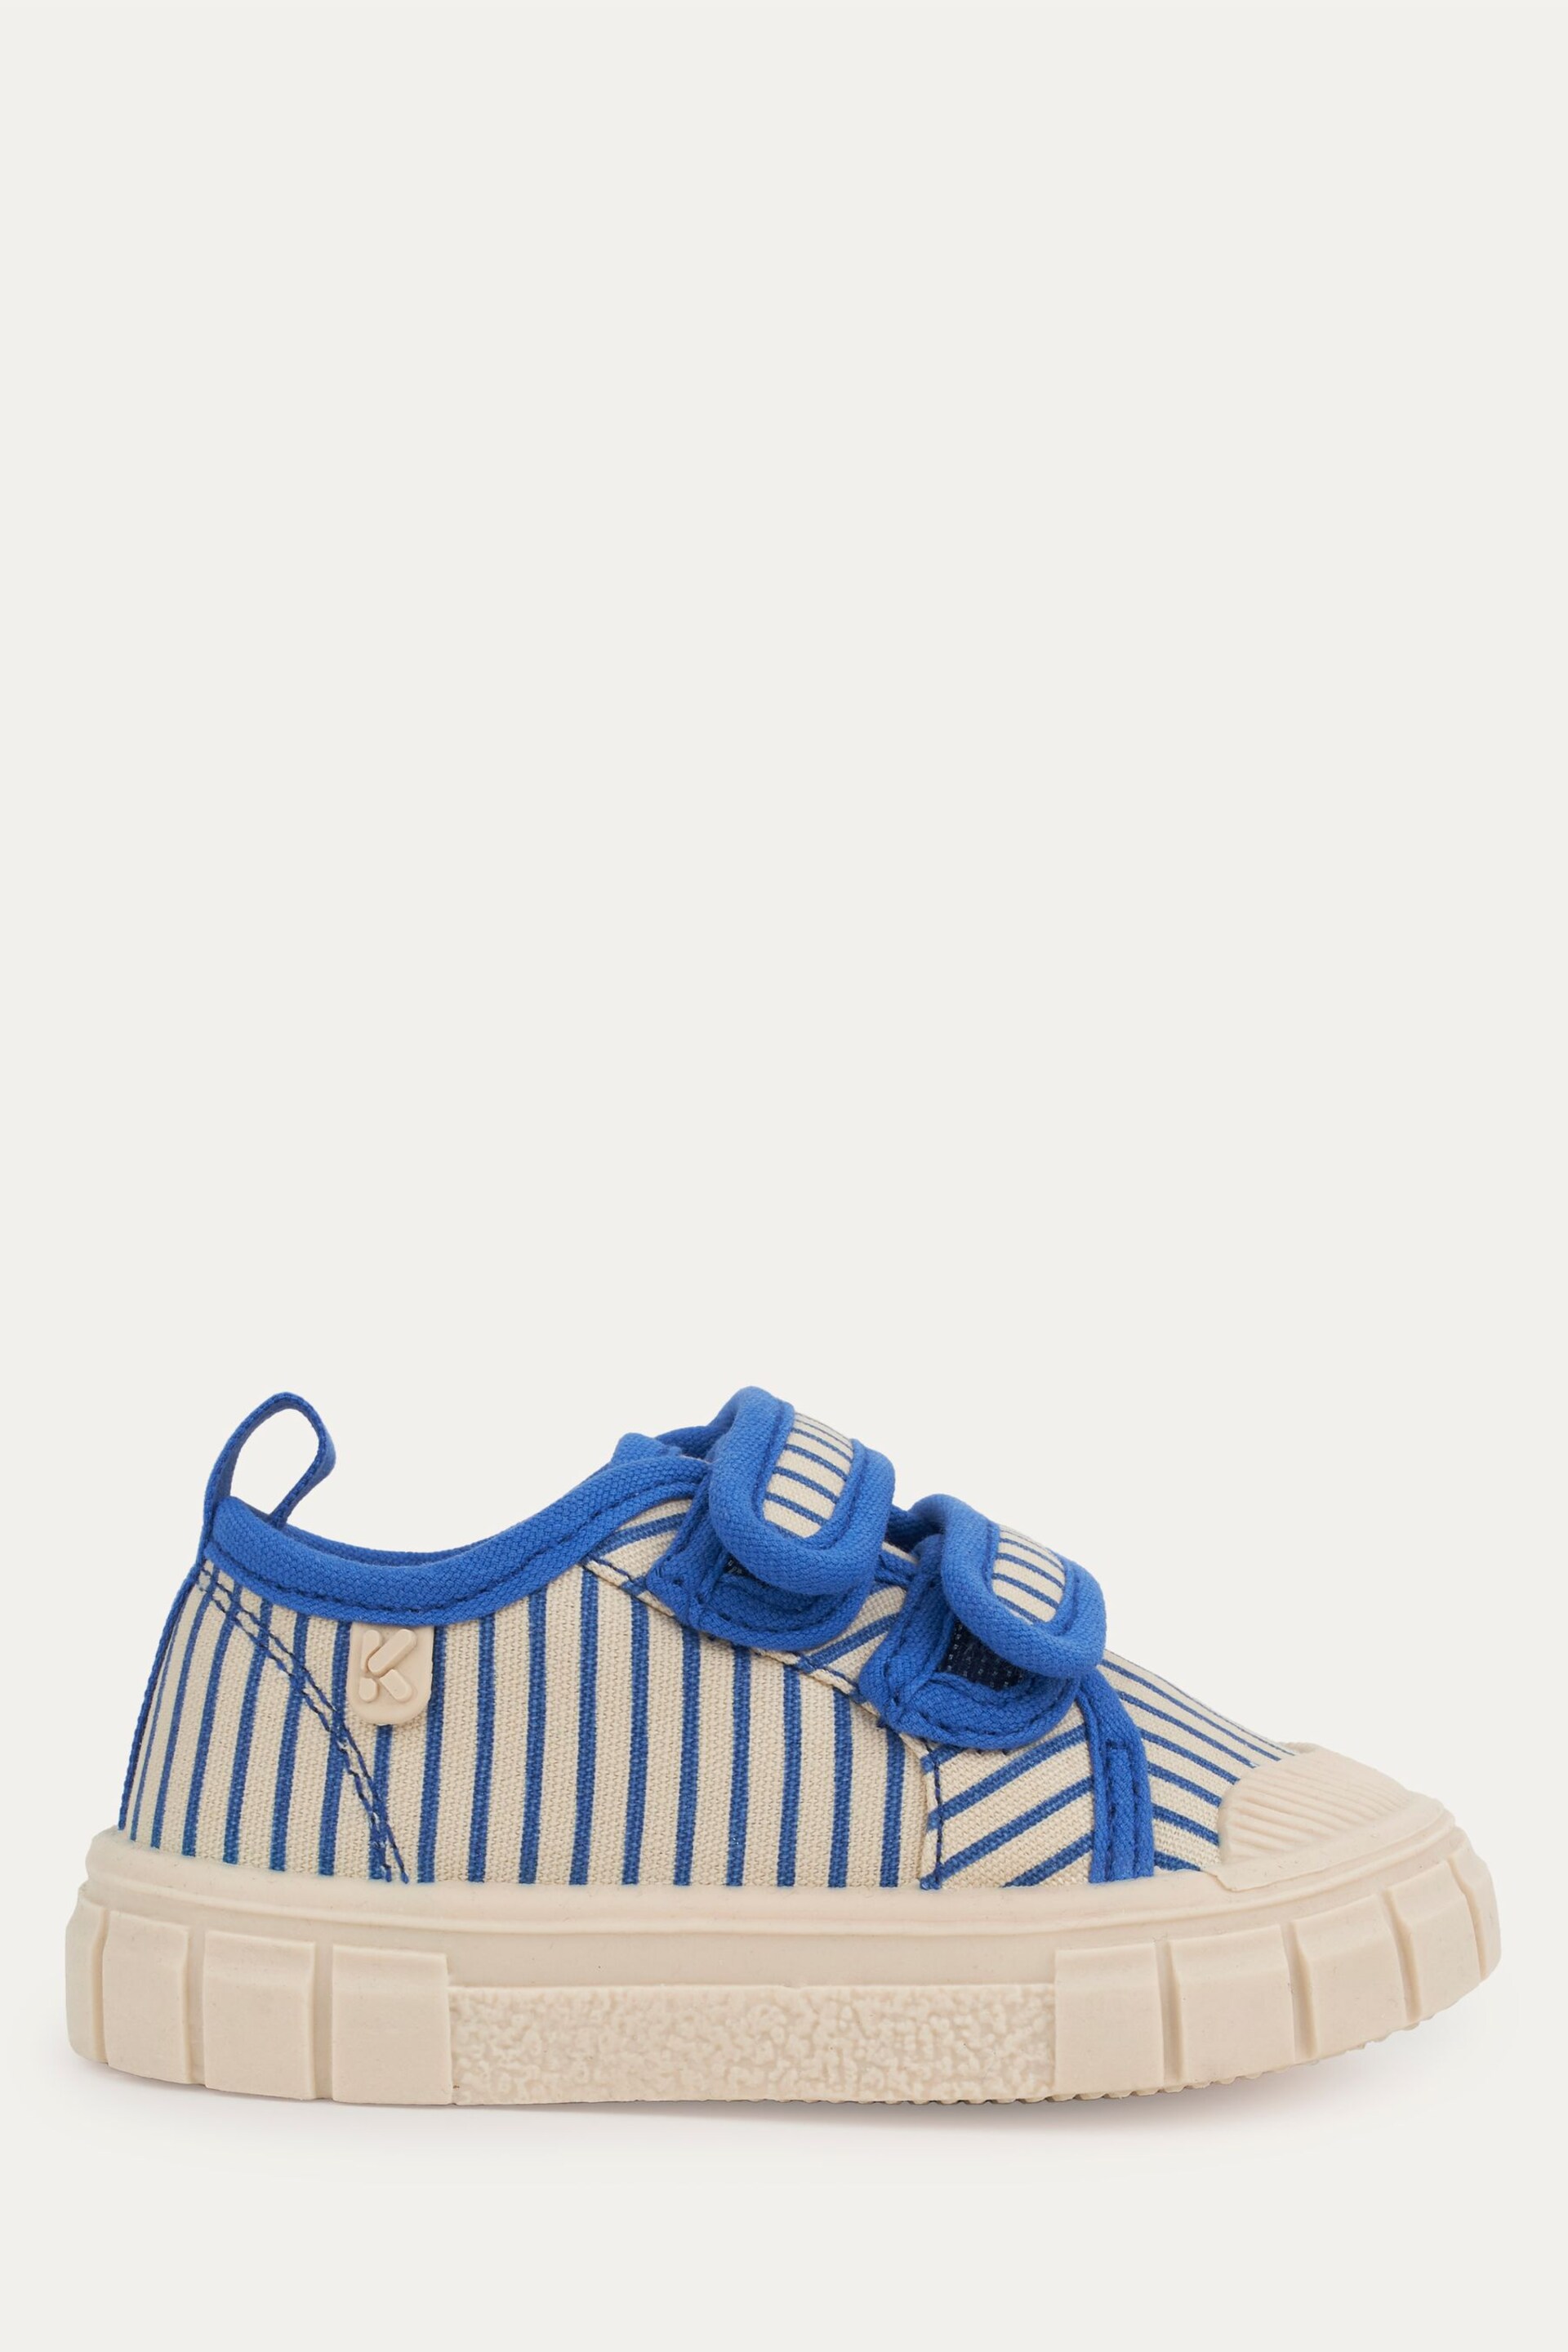 KIDLY Stripe Canvas Trainers - Image 1 of 4